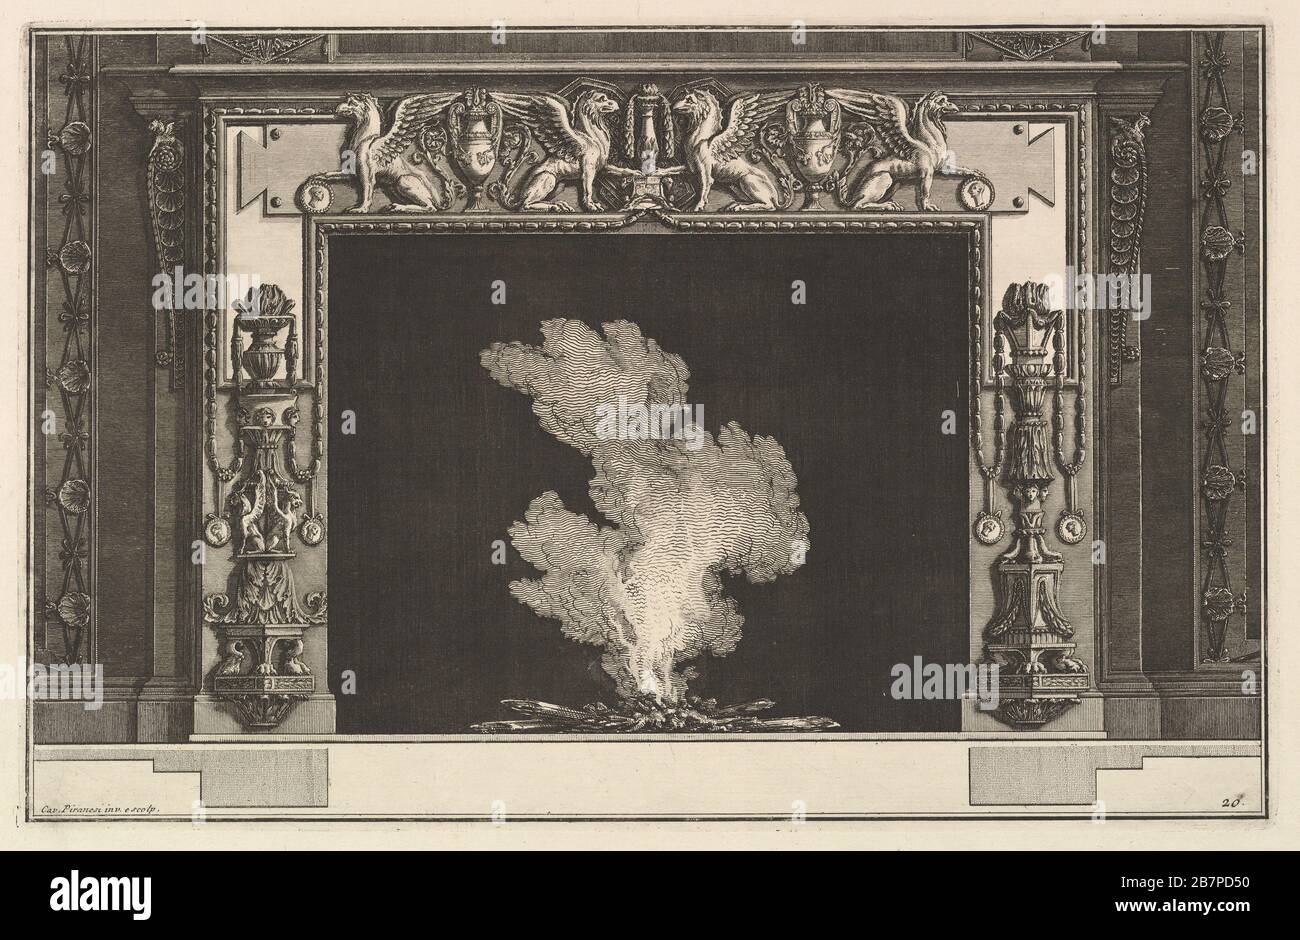 Chimneypiece: Affronted griffons on the Lintel and candelabra on the jambs (ch. Accompagn&#xe9;e de son Plan et d&#xe9;cor&#xe9;e d'une frise de griffons), from diverse Maniere d'adornare i camed ogni a parizes (all parizes). 17659. Stockfoto